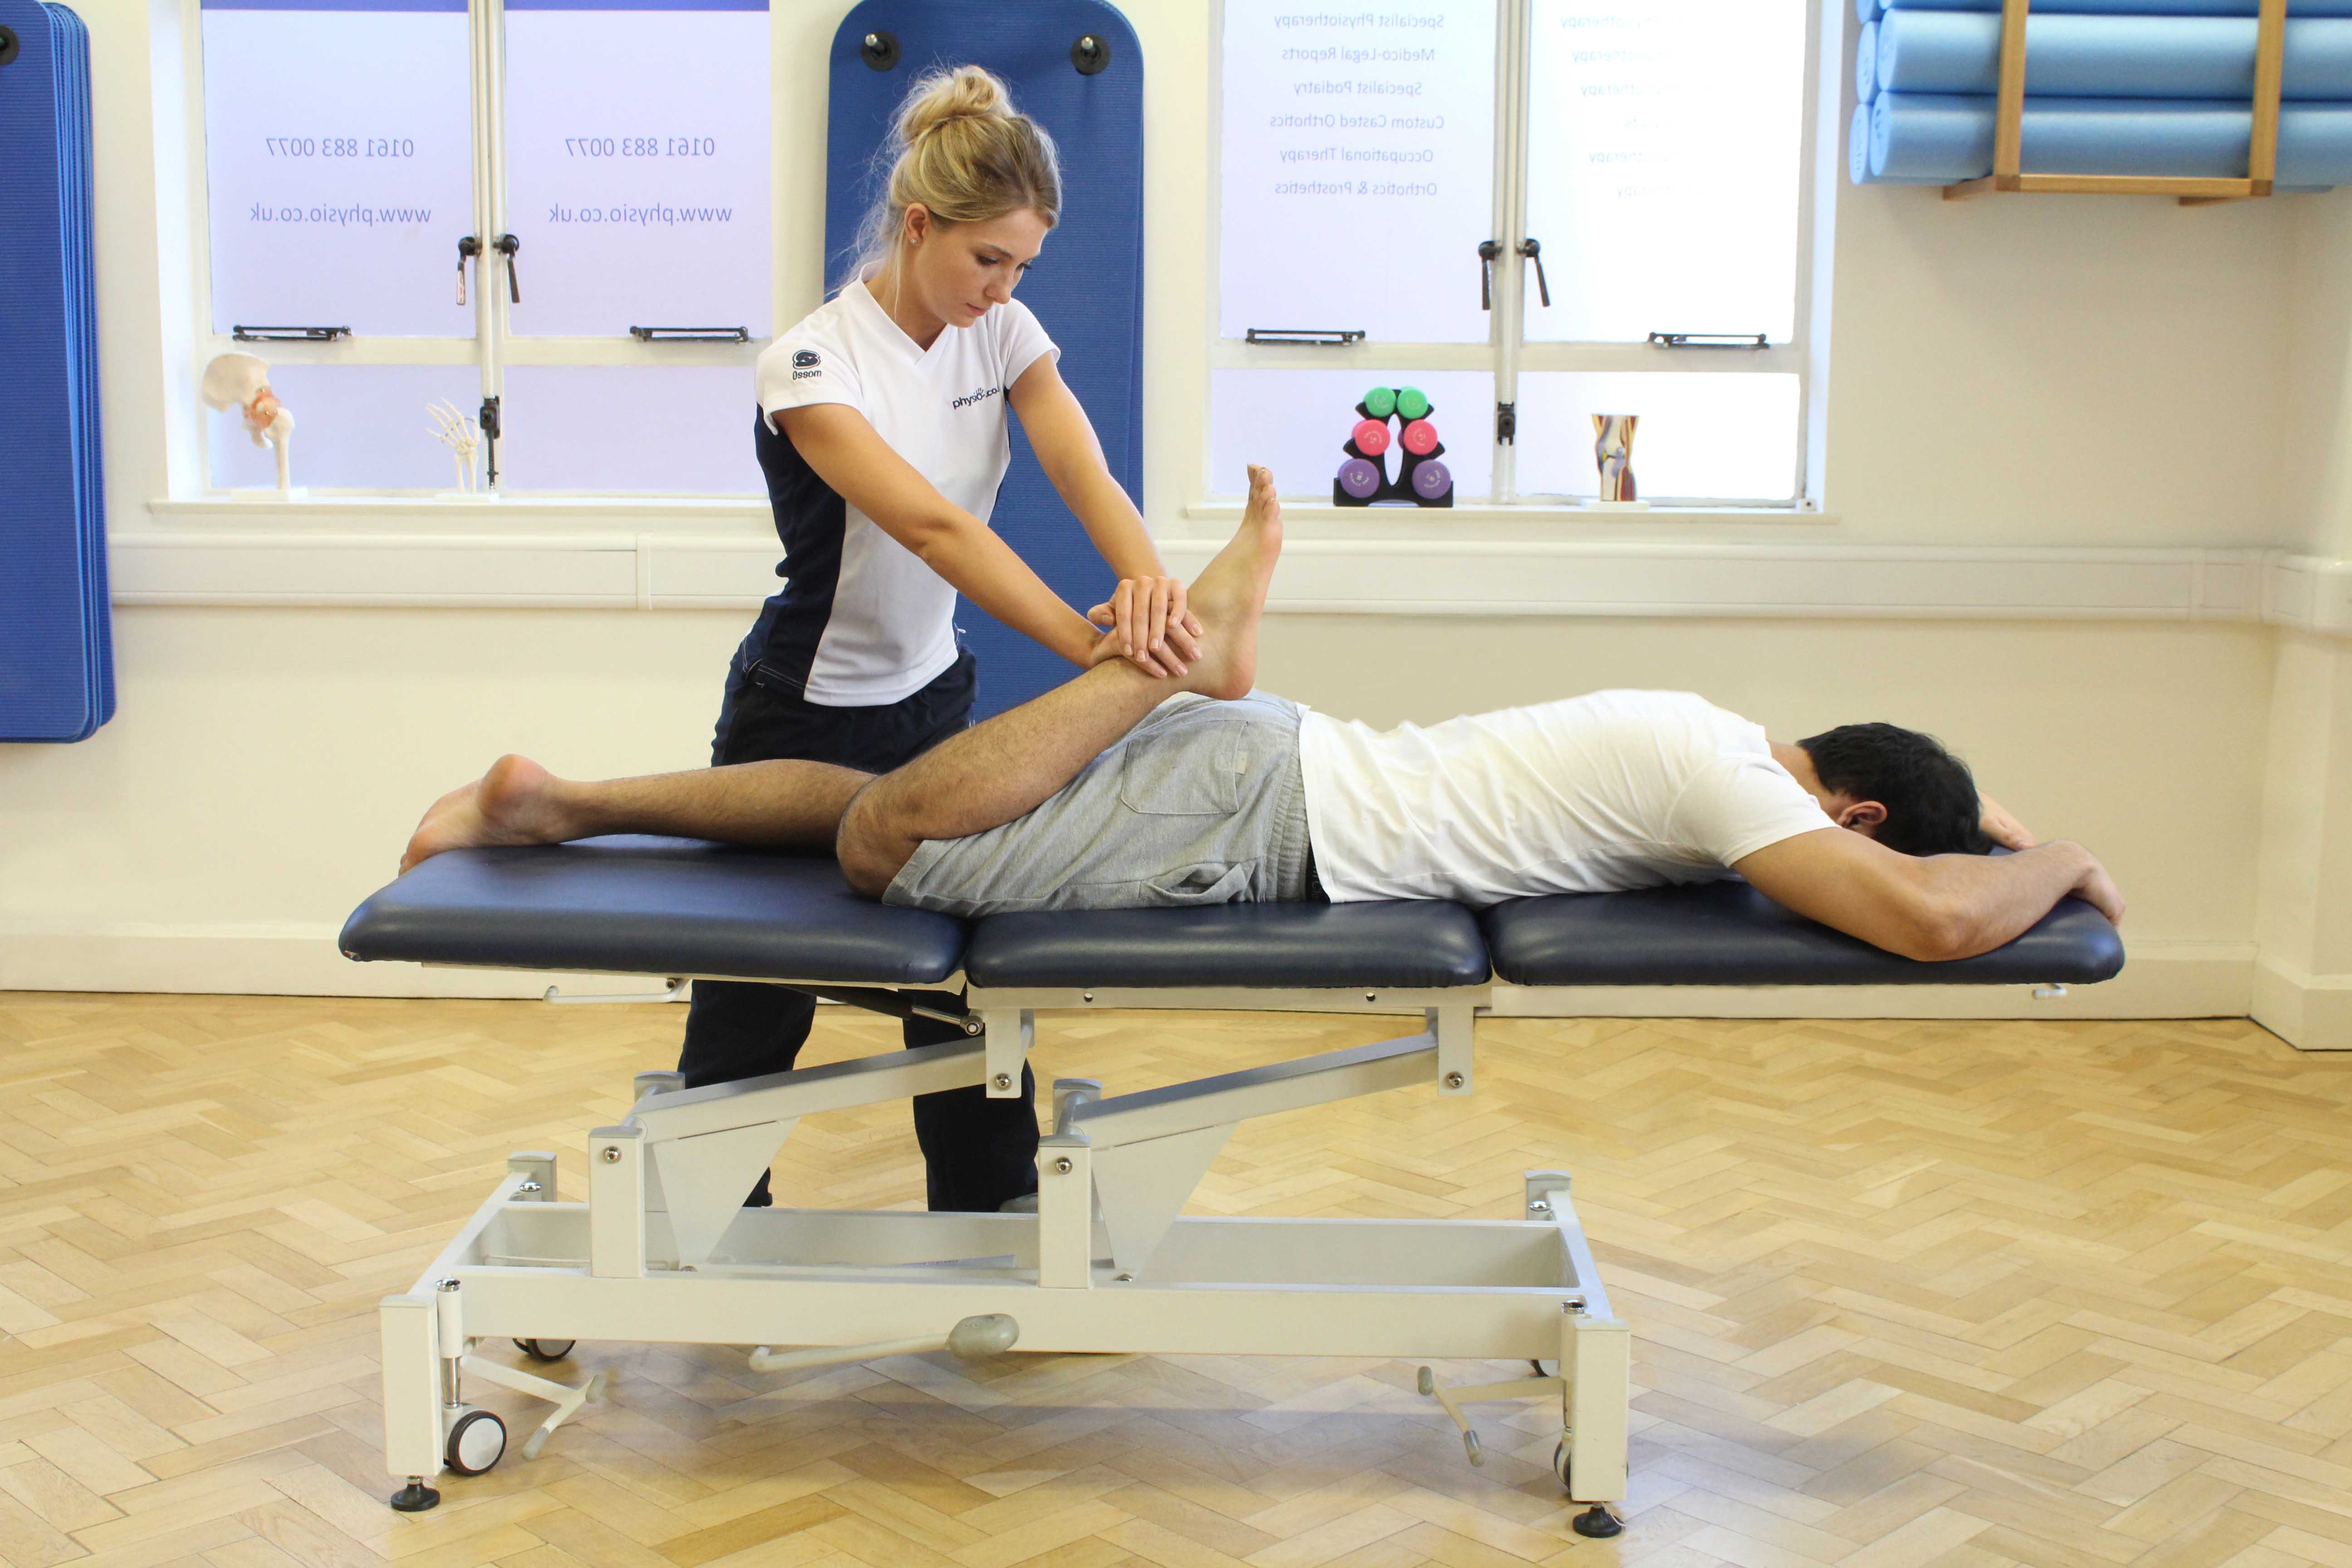 Passive stretch applied to the quadricep muscles by a specialist musculoskeletal therapist